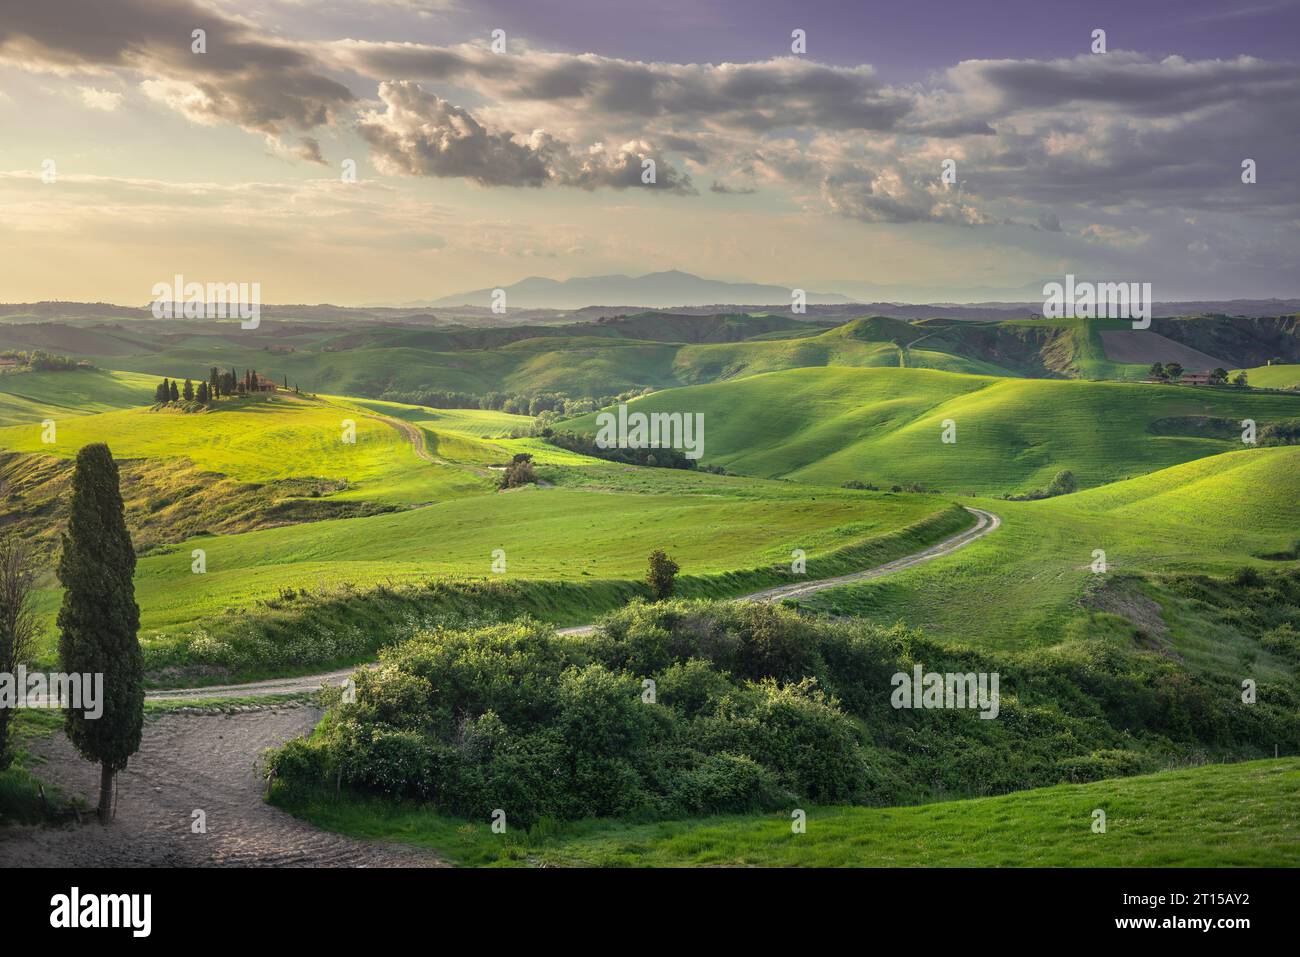 Countryside landscape, rolling hills, rural road, and green fields at sunset. Volterra, Tuscany region, Italy, Europe Stock Photo